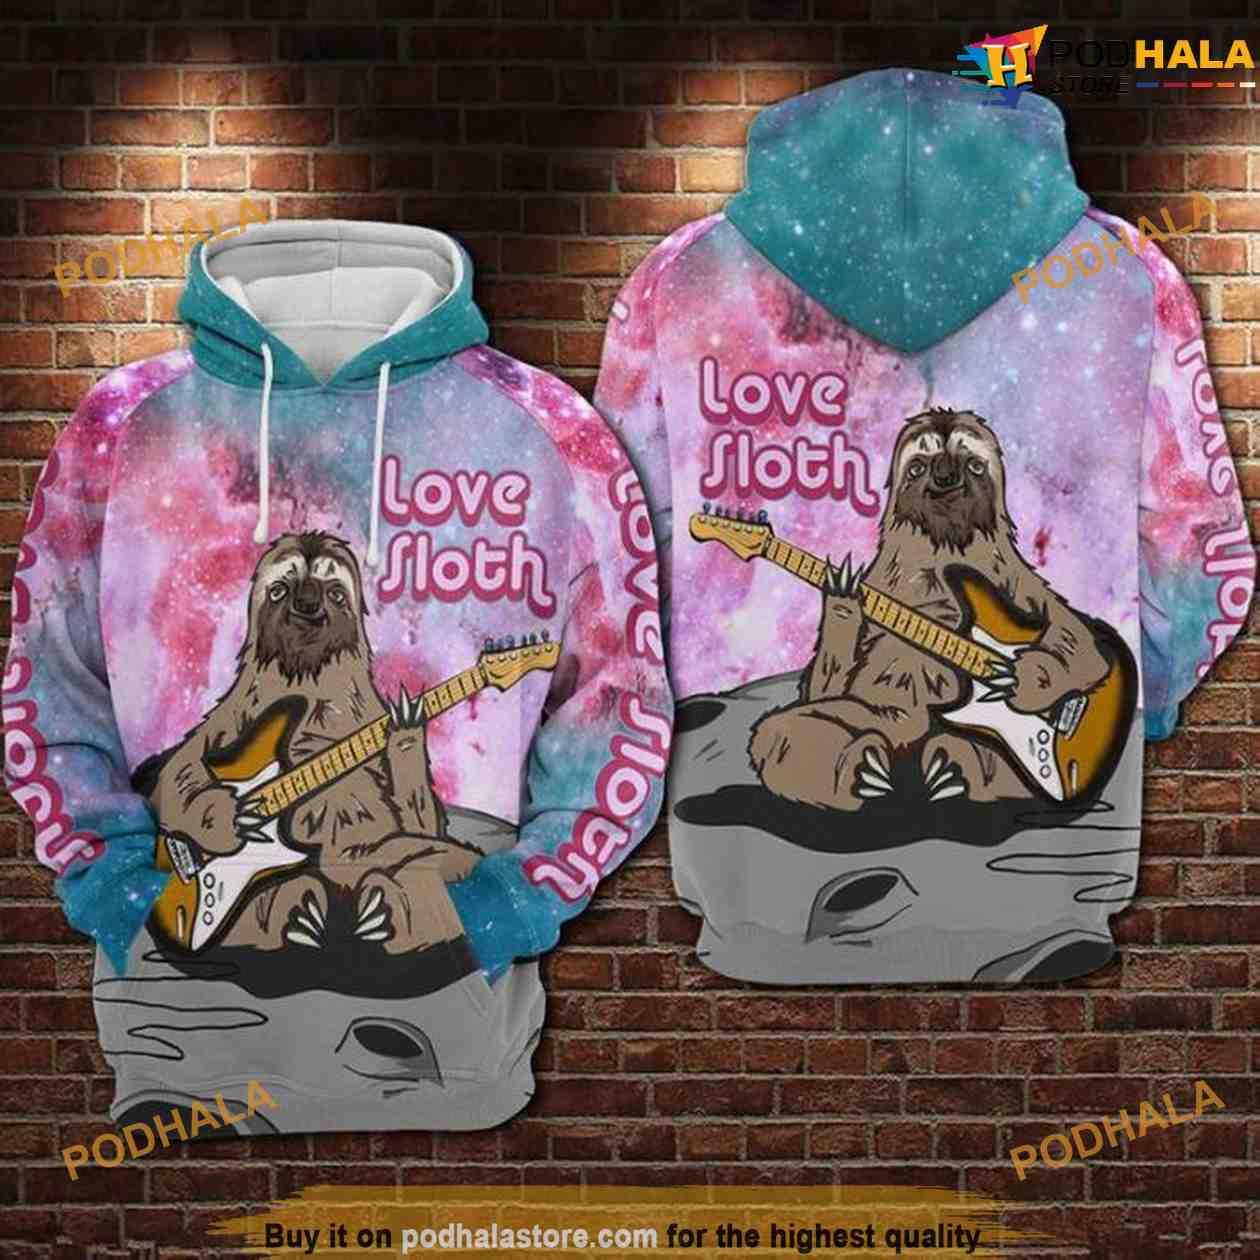 Dragon Water 3D Zip HOODIE All Over Print Mother Day Gift Best Price US Size